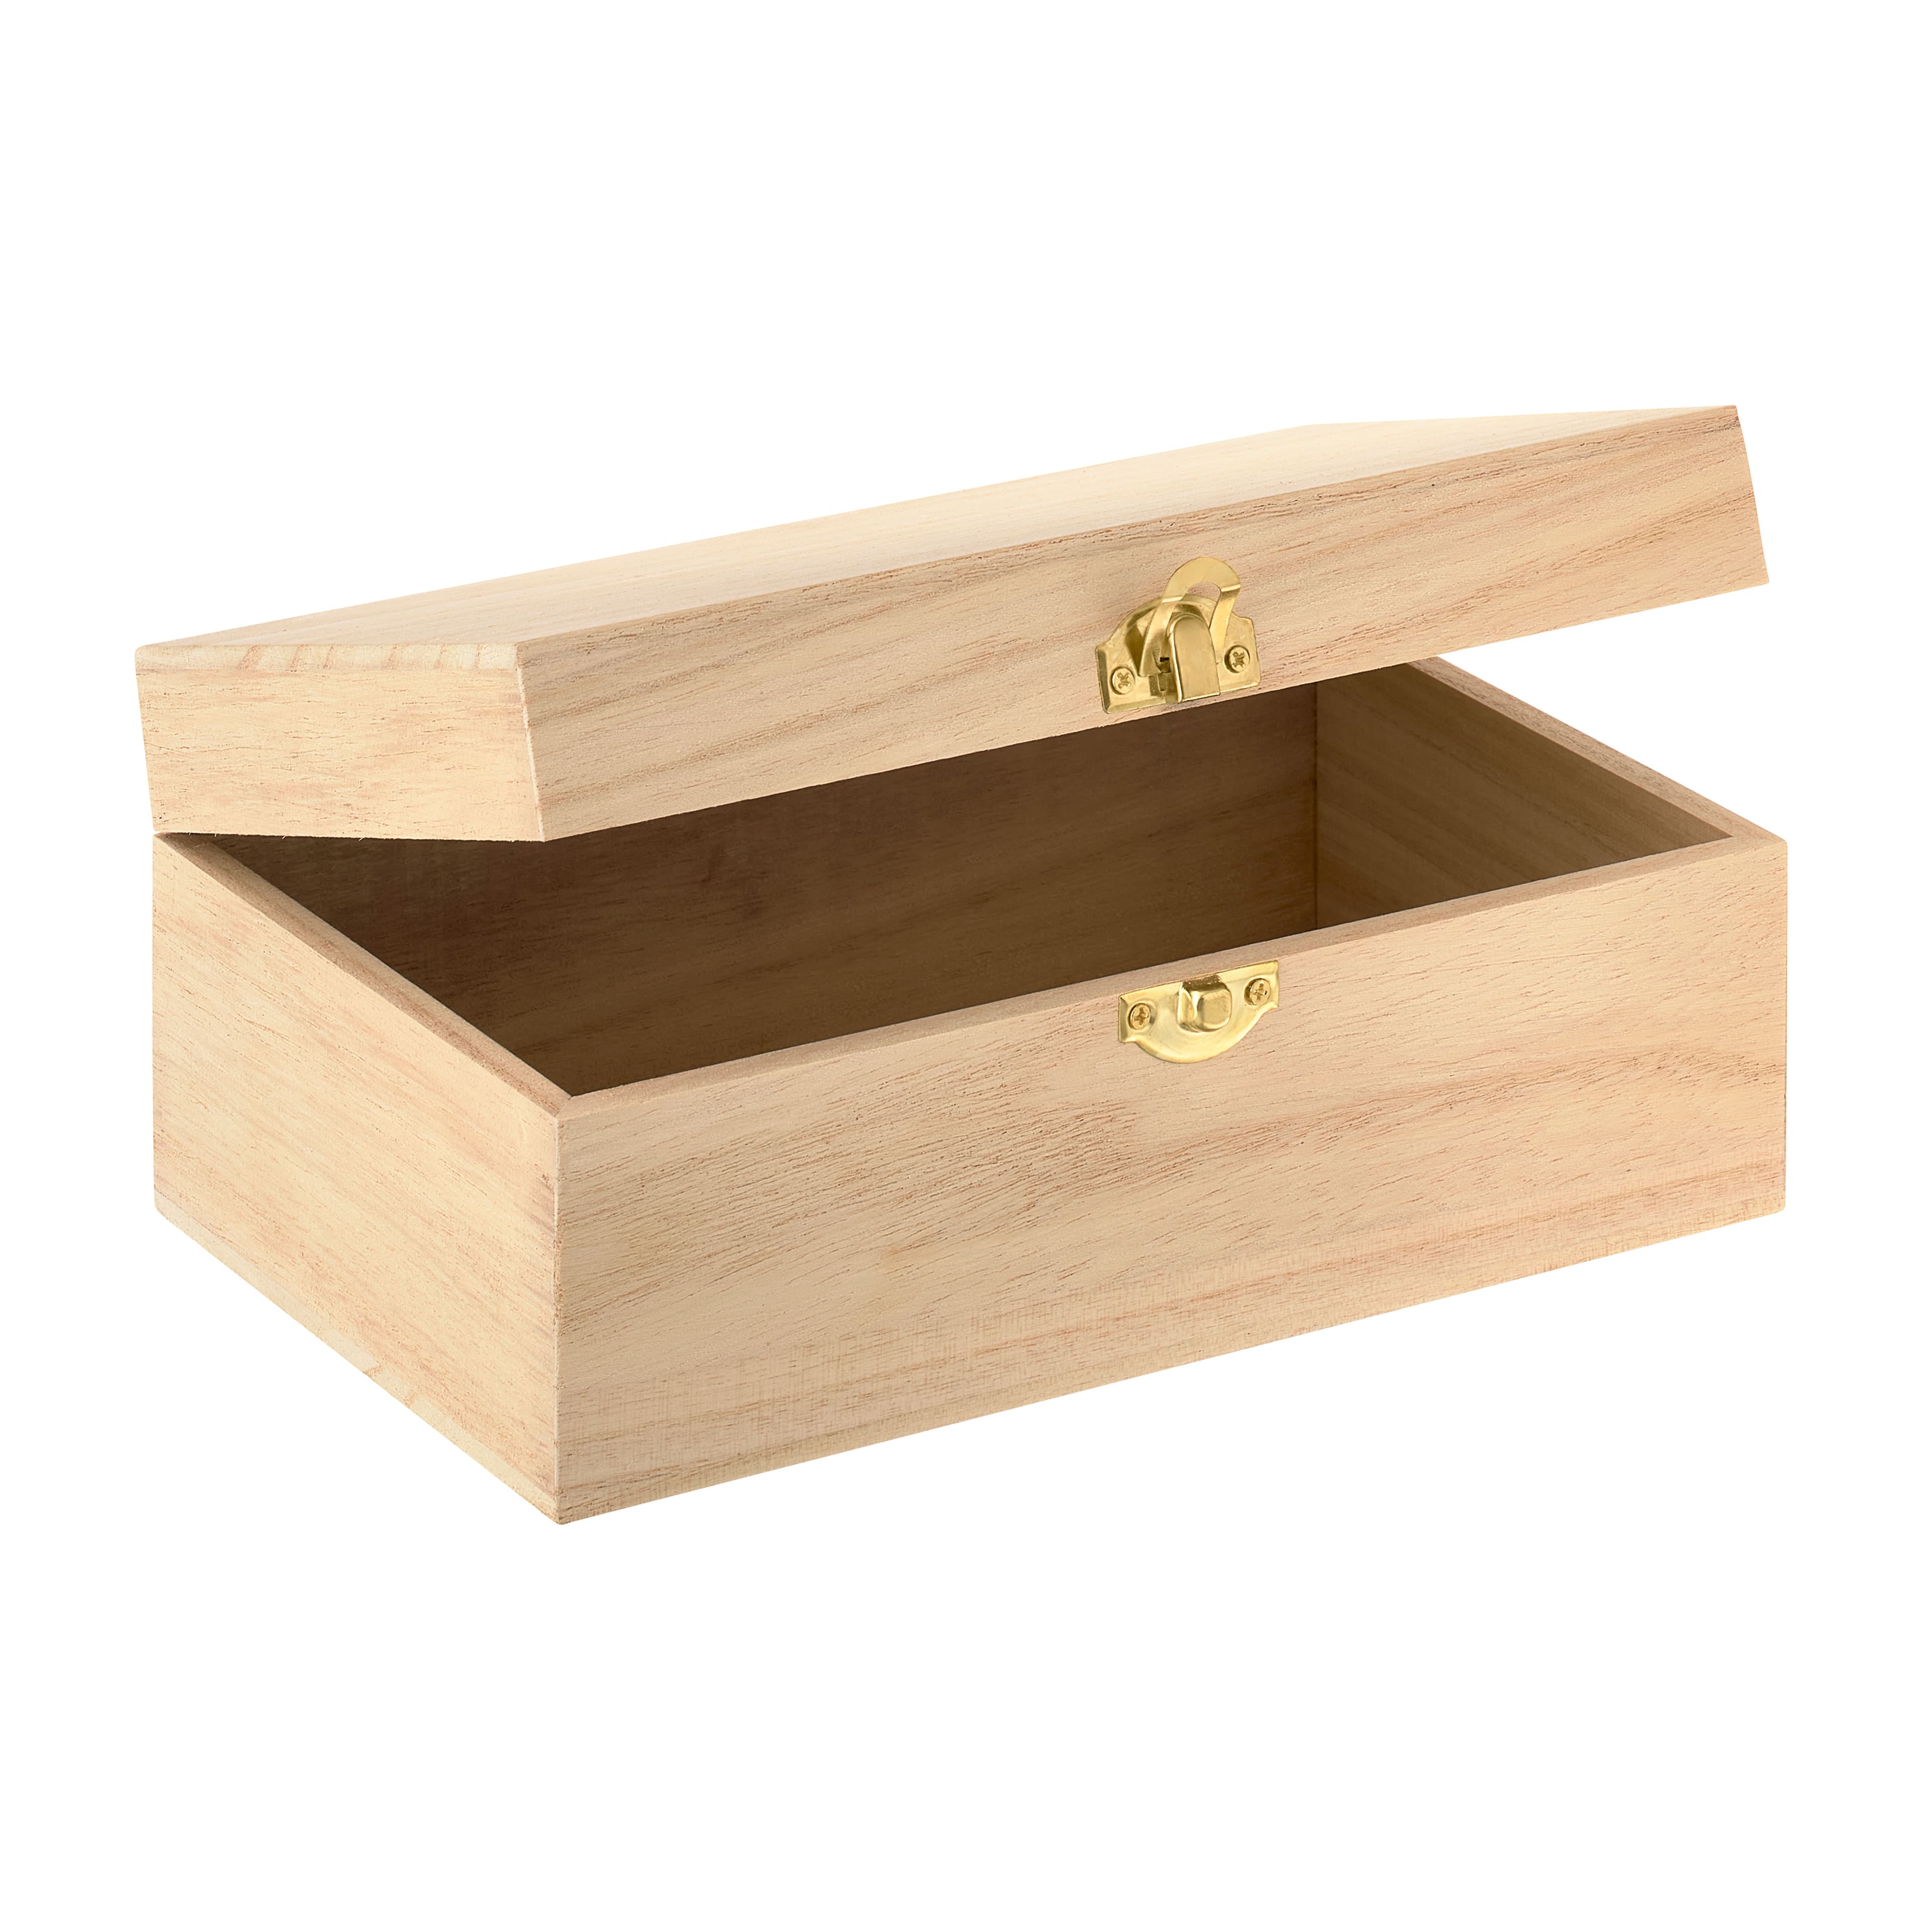 Earth-Tone Mini Wood Box: Simple and Versatile Storage Solution Wooden  storage boxes, Custom wood boxes, Handcrafted wooden boxes, Vintage wood  crates, Small wooden boxes